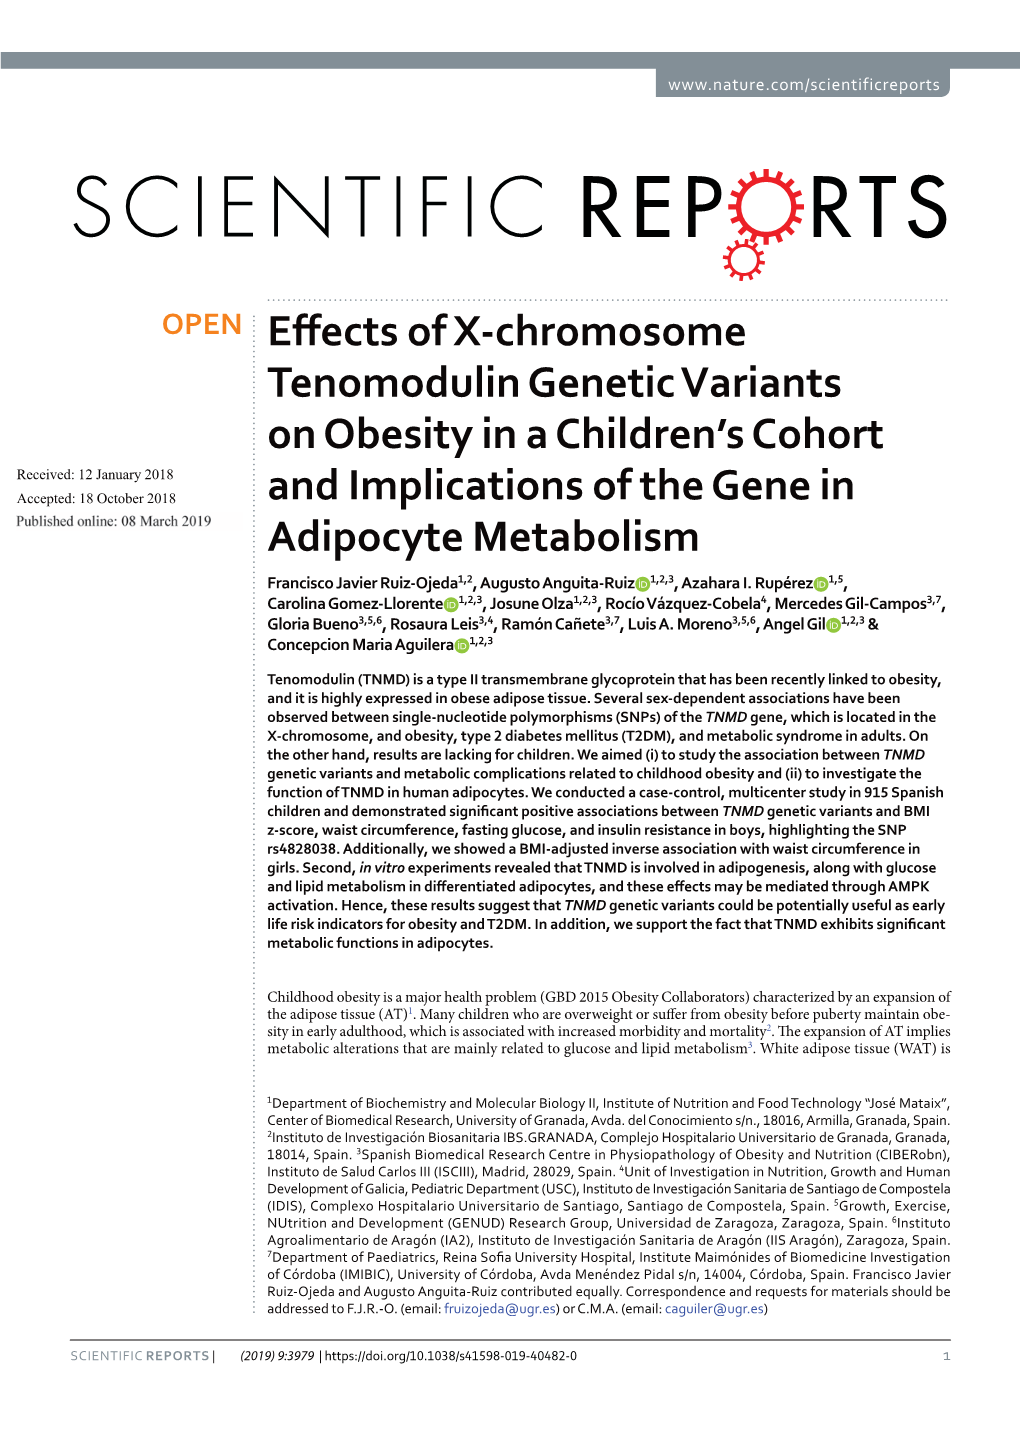 Effects of X-Chromosome Tenomodulin Genetic Variants On